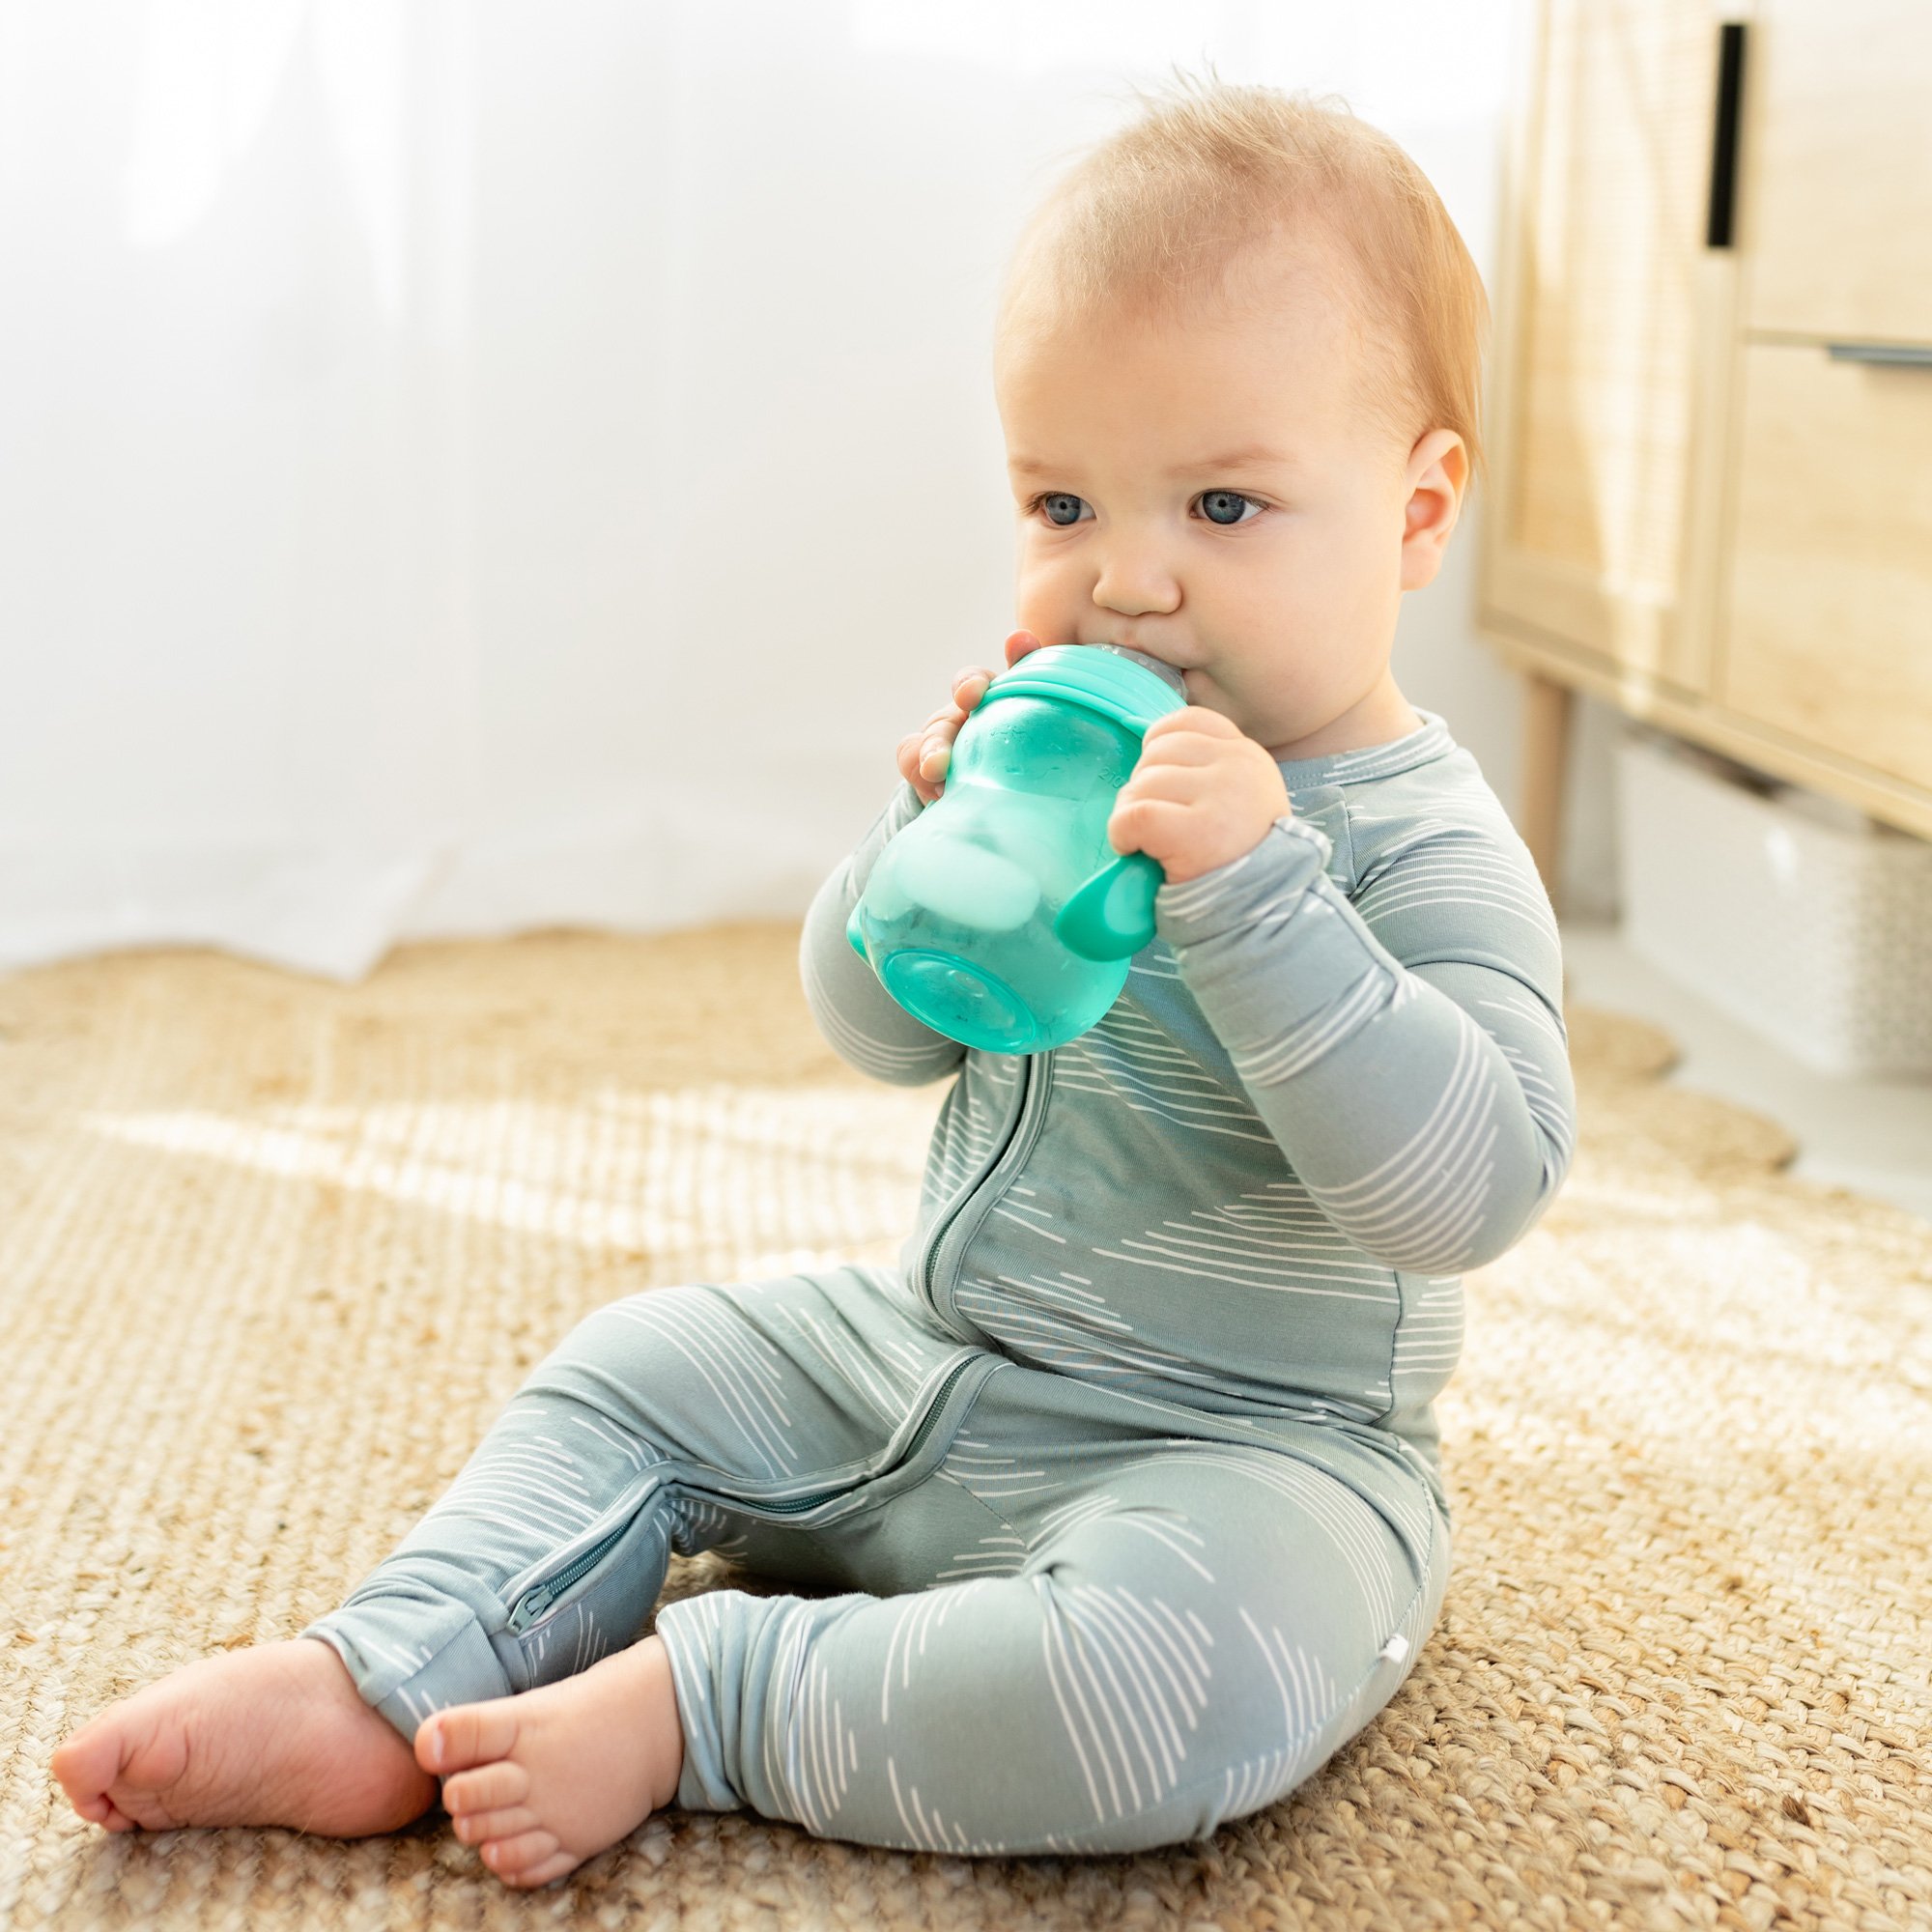 baby drinking from cup on floor